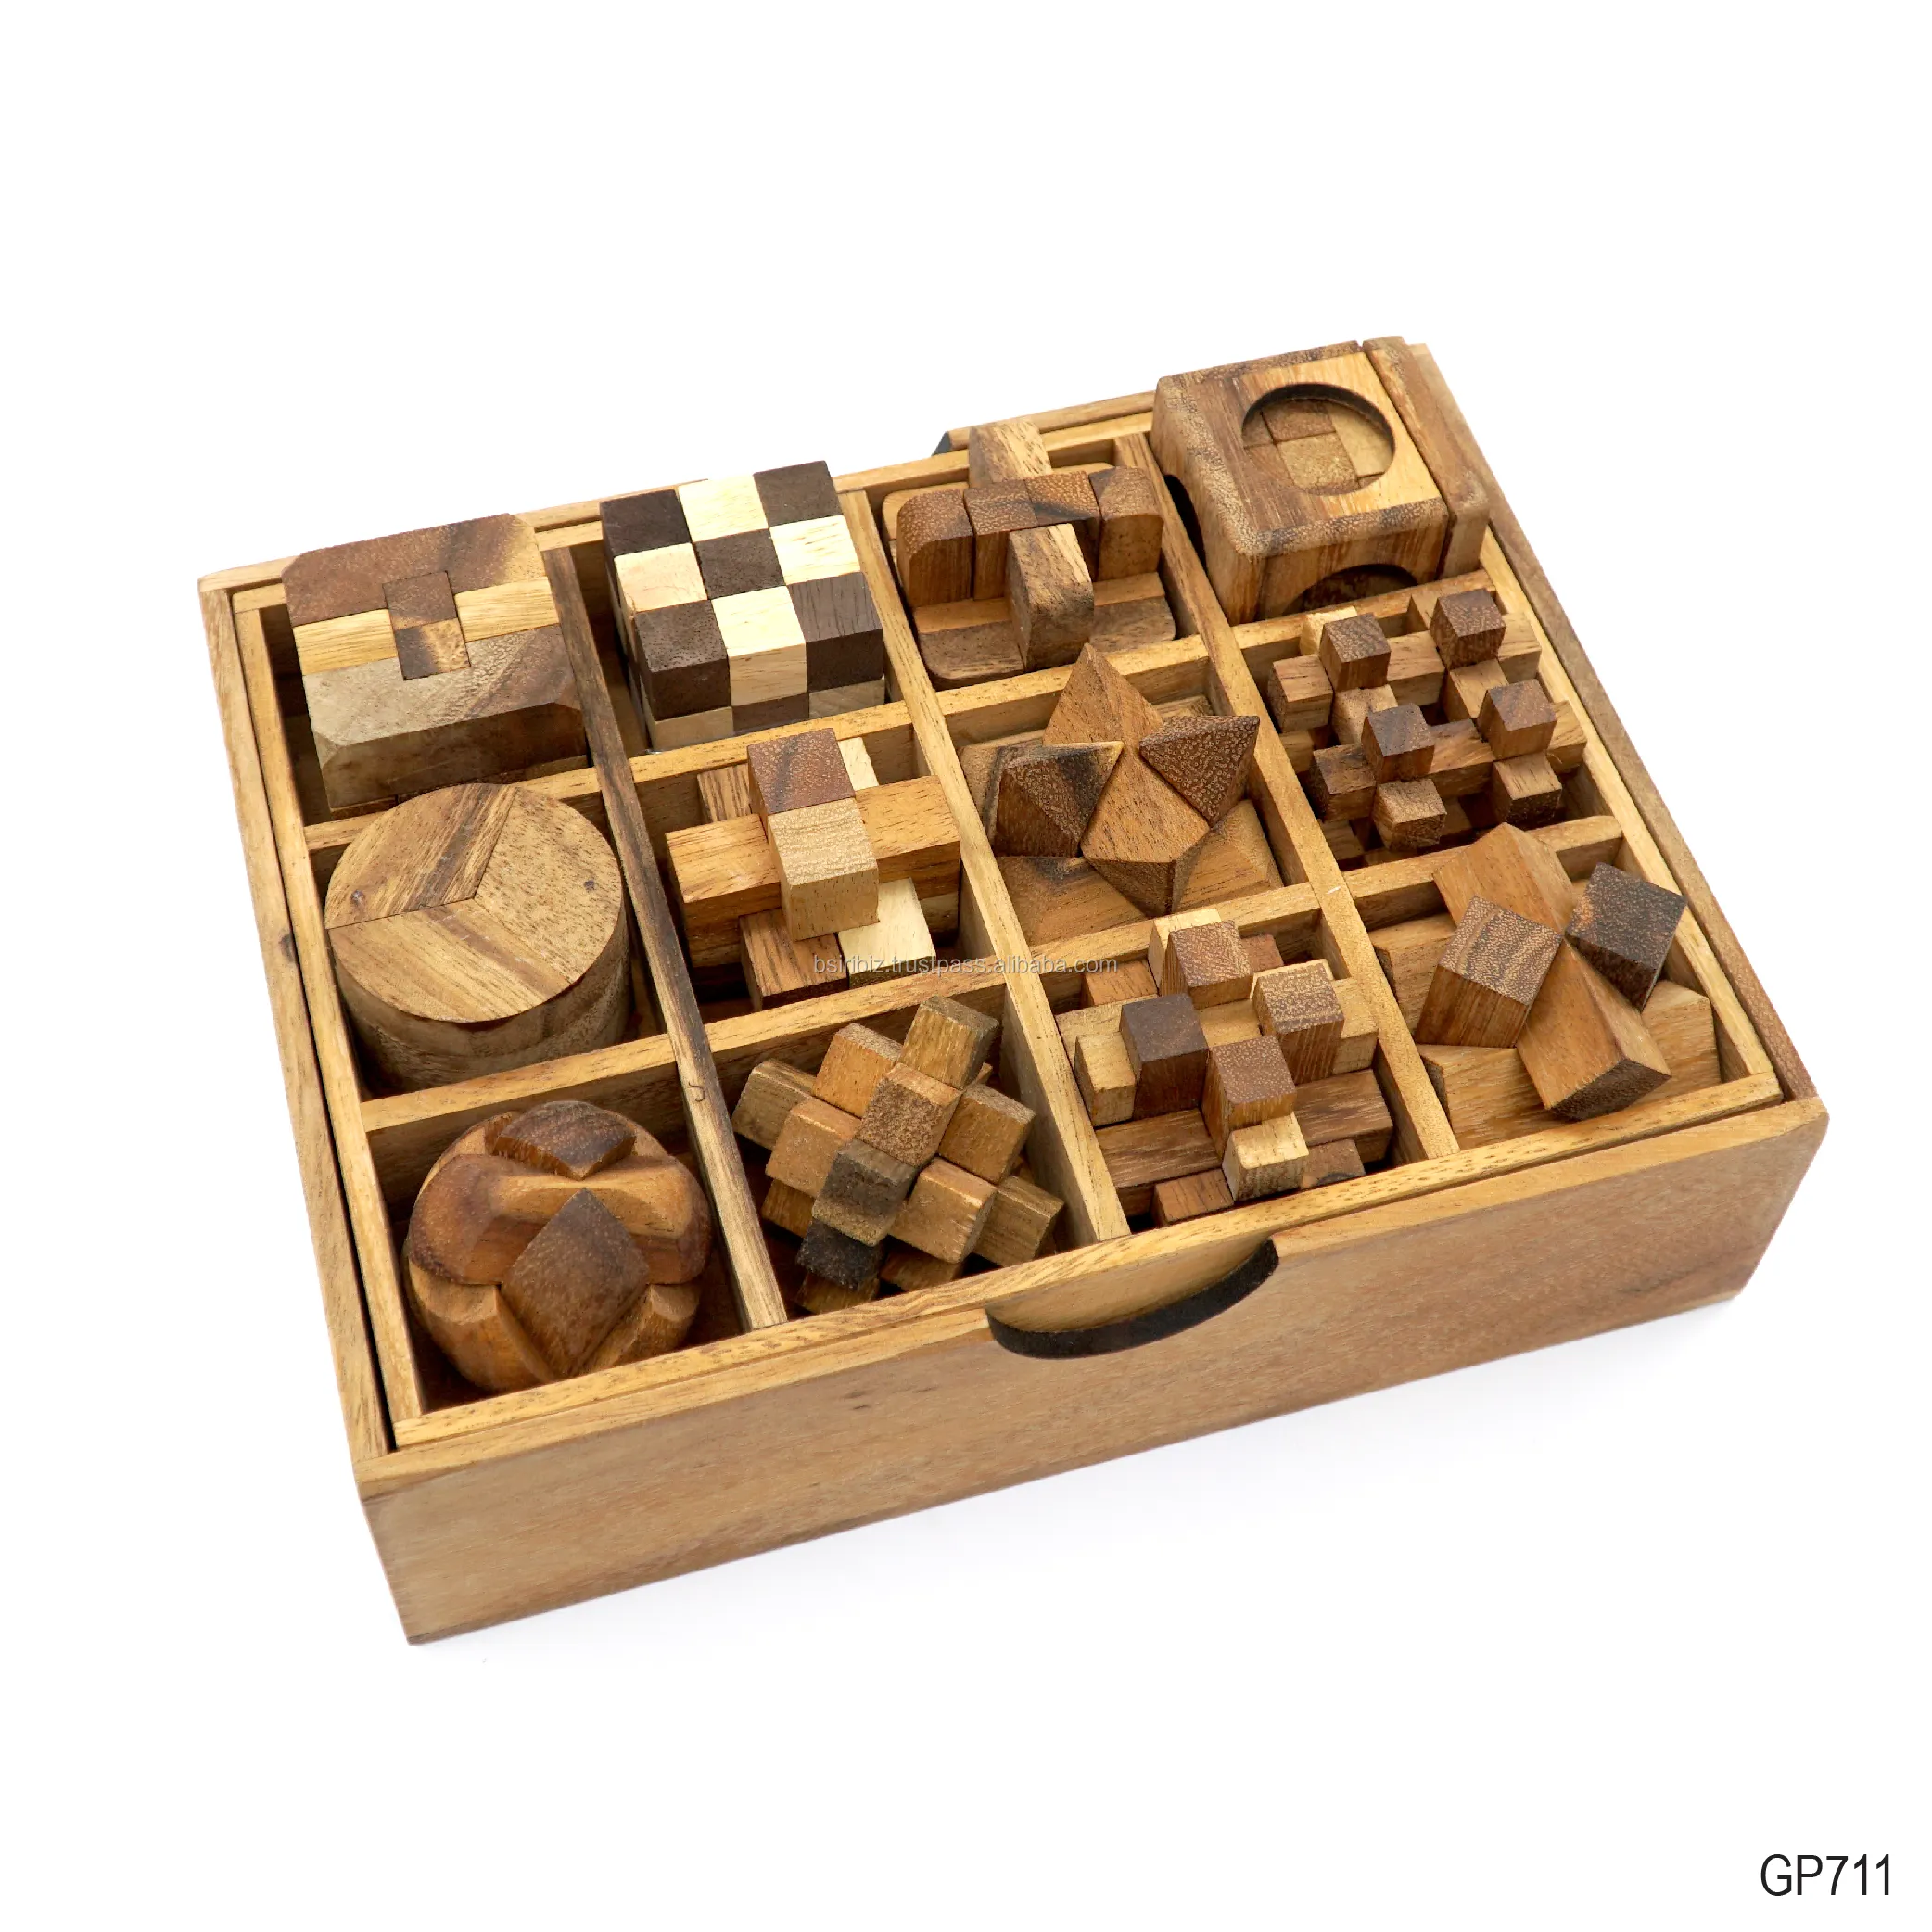 A Unique Popular Games Set of 12 Wood Puzzle Set for Adults Brain Games and Educational Games for Kids Carton Natural Playing